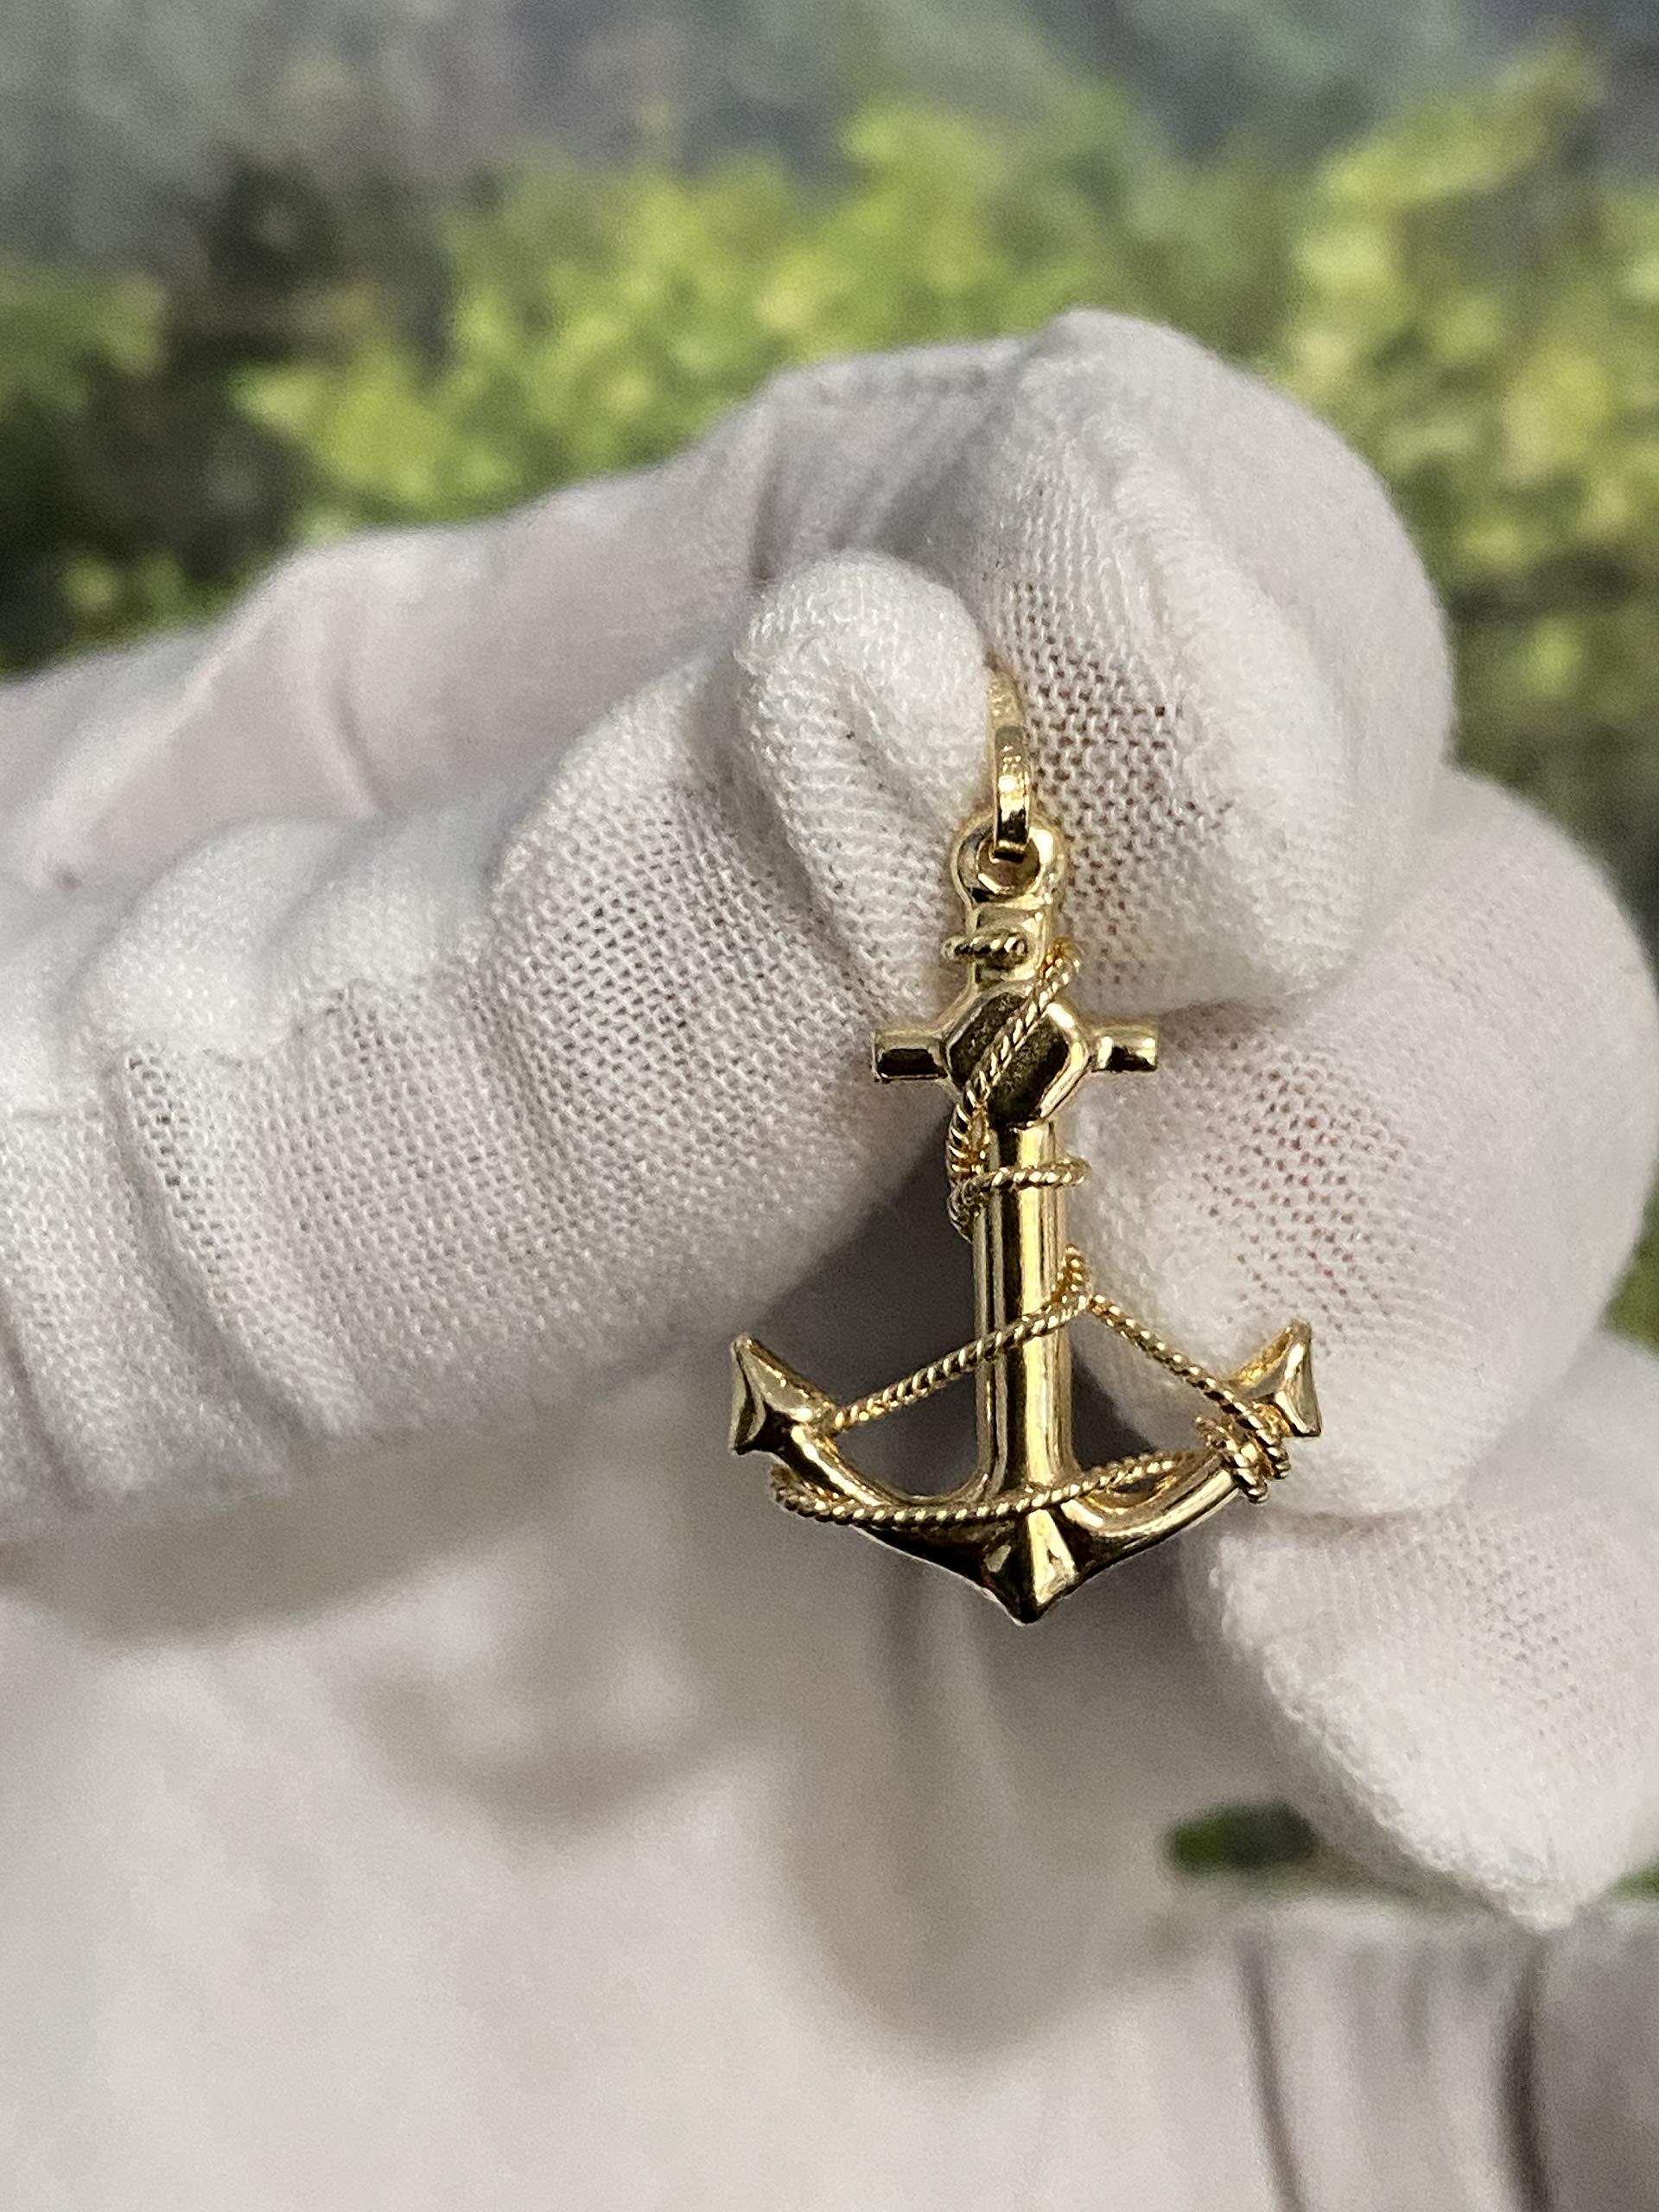 TGDJ Anchor Pendant 23 x 18 mm, 14k Yellow Gold Jesus Cross Necklace, Real Gold Charm Pendants Gift for all occasions